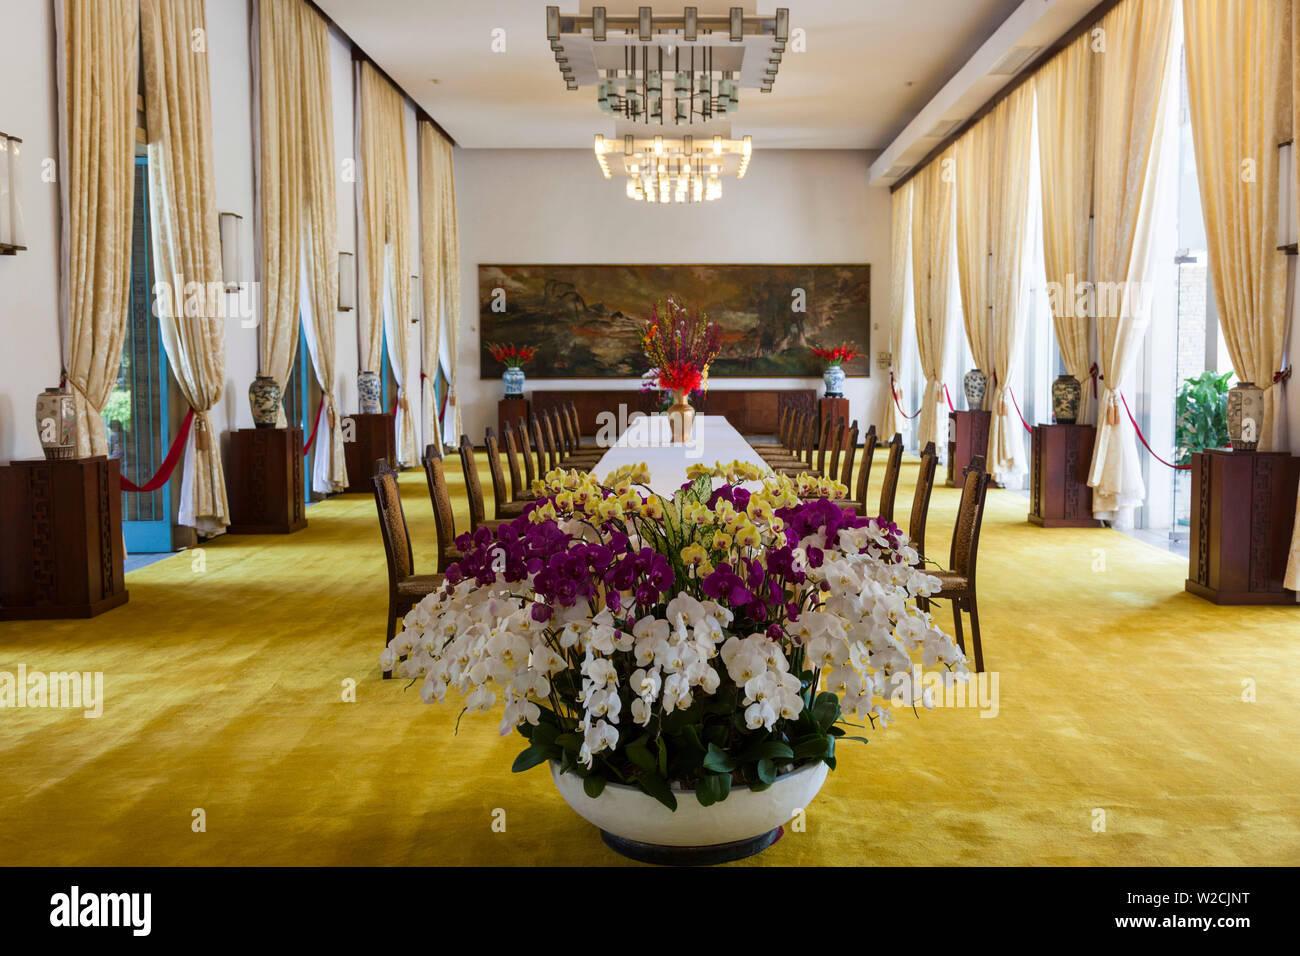 Vietnam, Ho Chi Minh City, Reunification Palace, former seat of South Vietnamese Government, state dining room Stock Photo